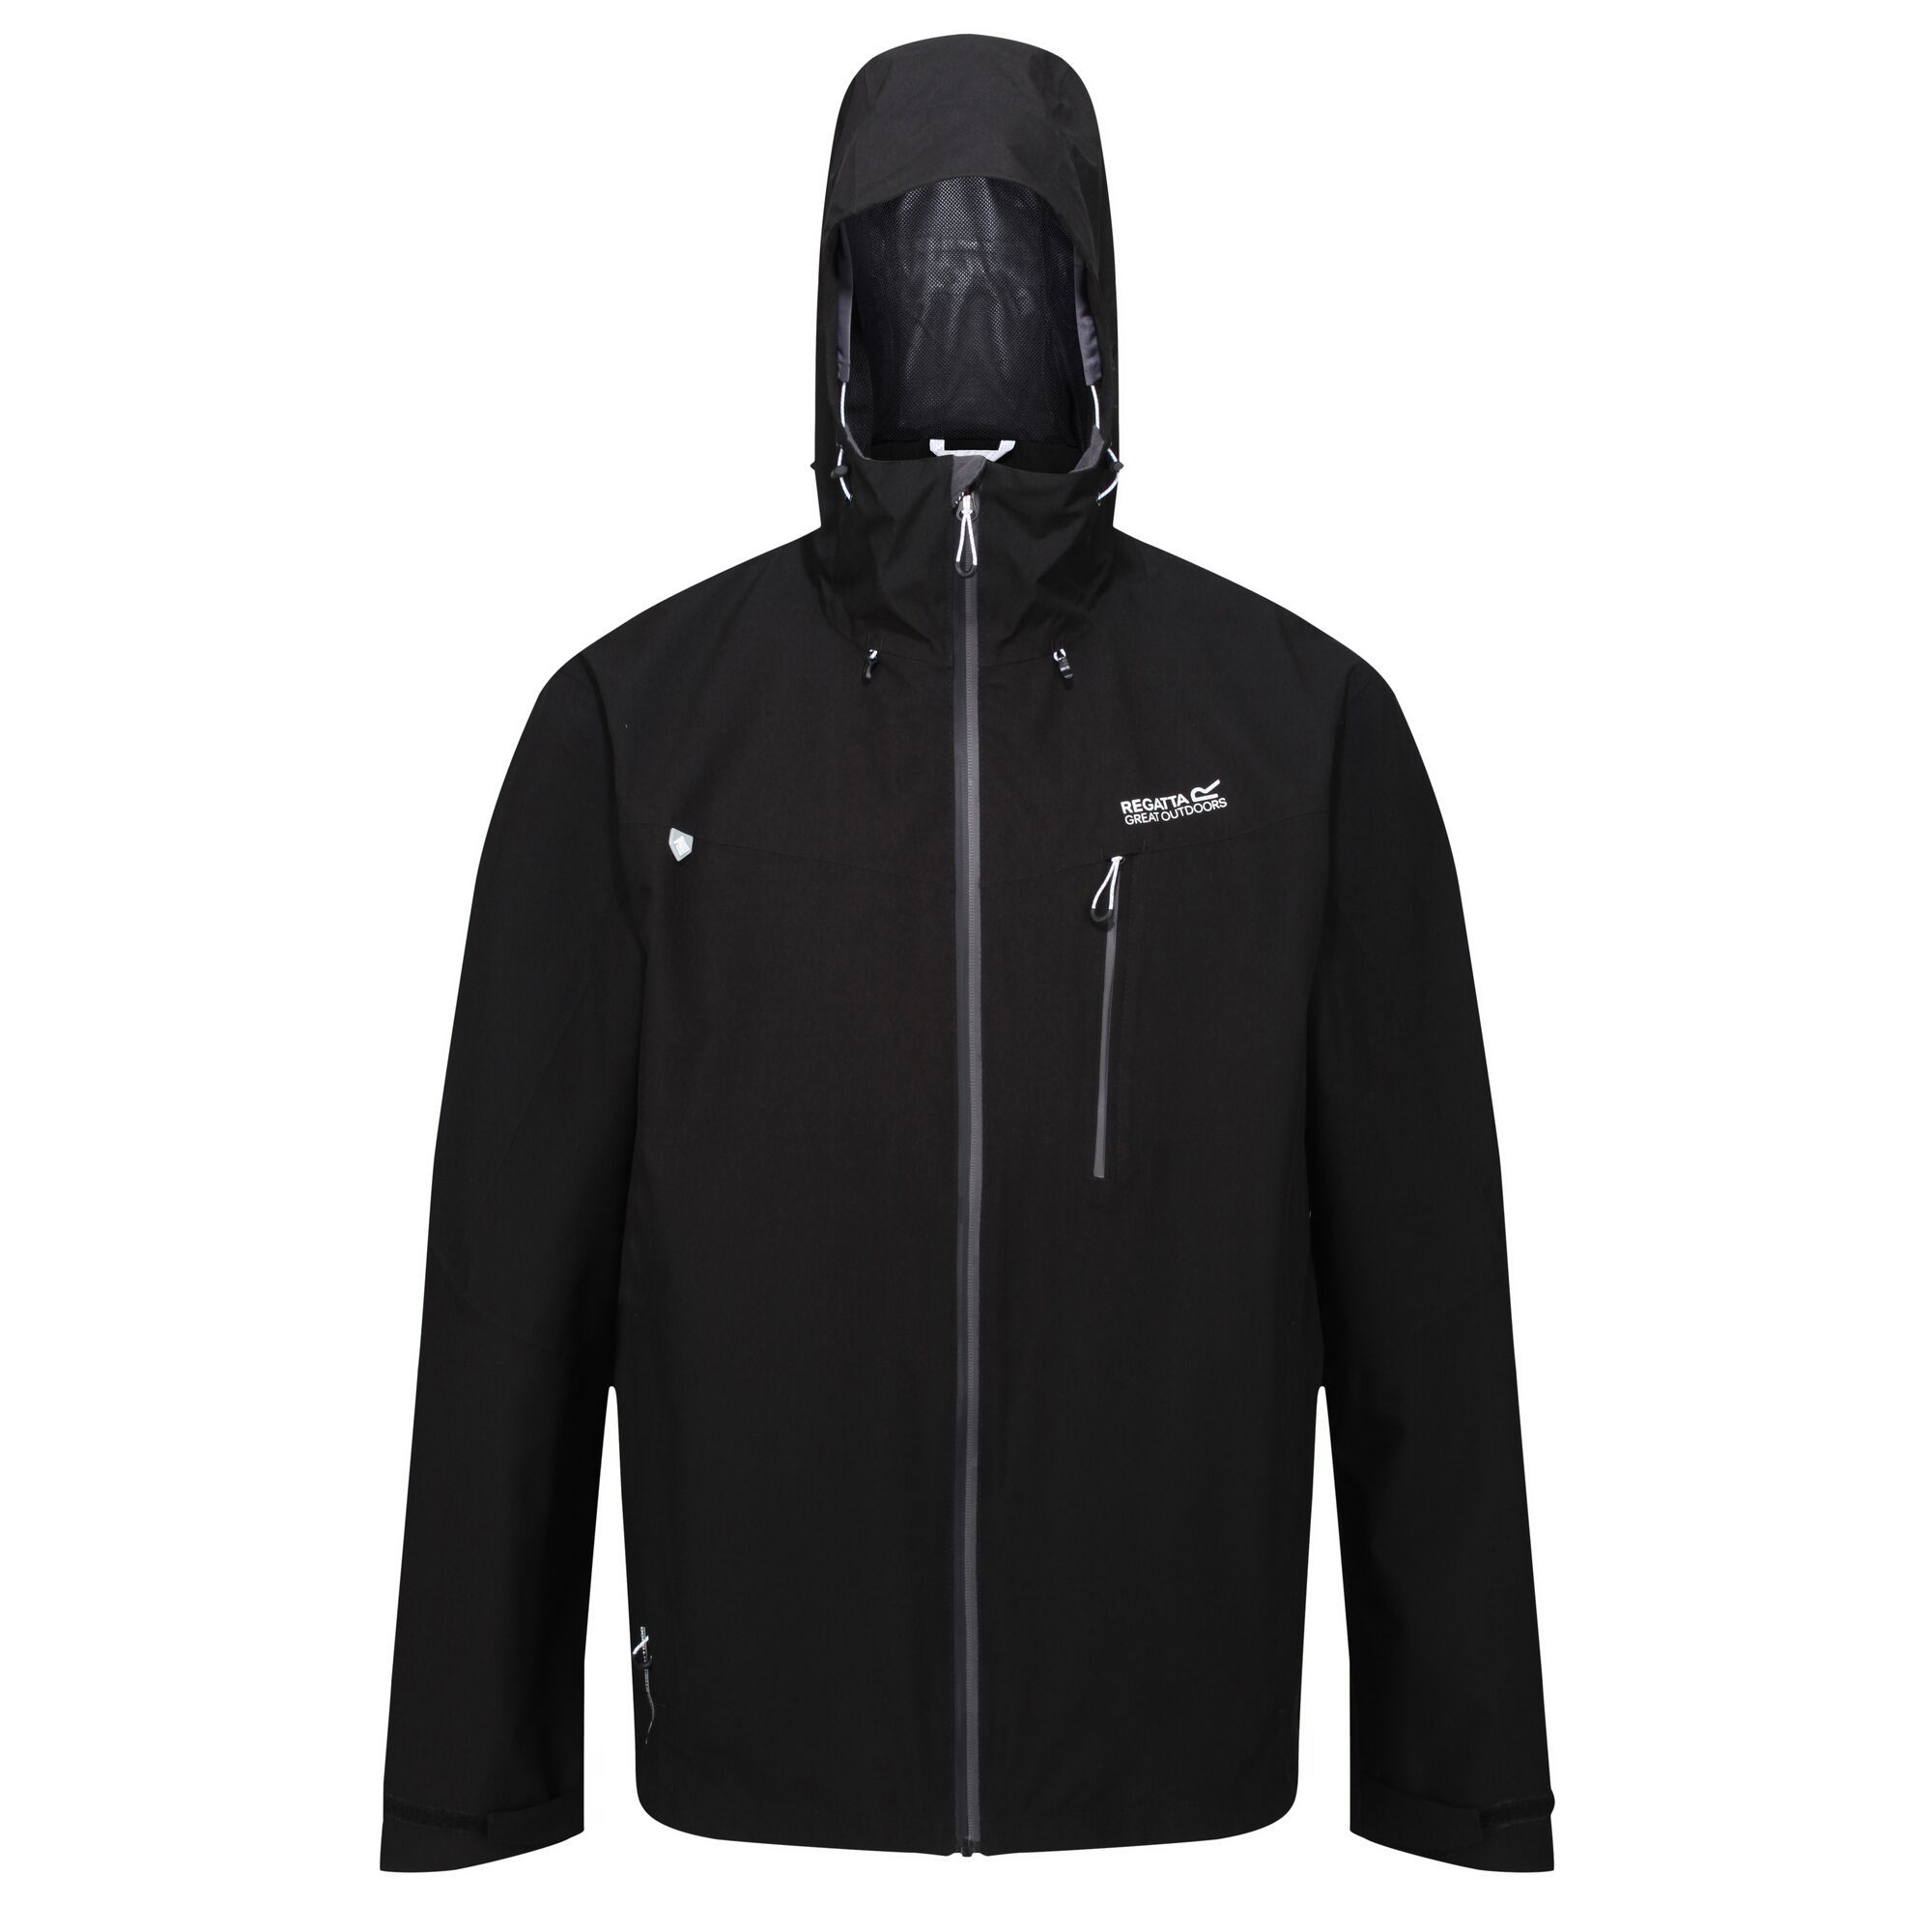 Waterproof hooded jacket with grown on technical hood with adjusters. Hi-tech water repellent centre front zip with inner zip and chin guard. Ideal for wet weather. 100% polyester. Hand wash.